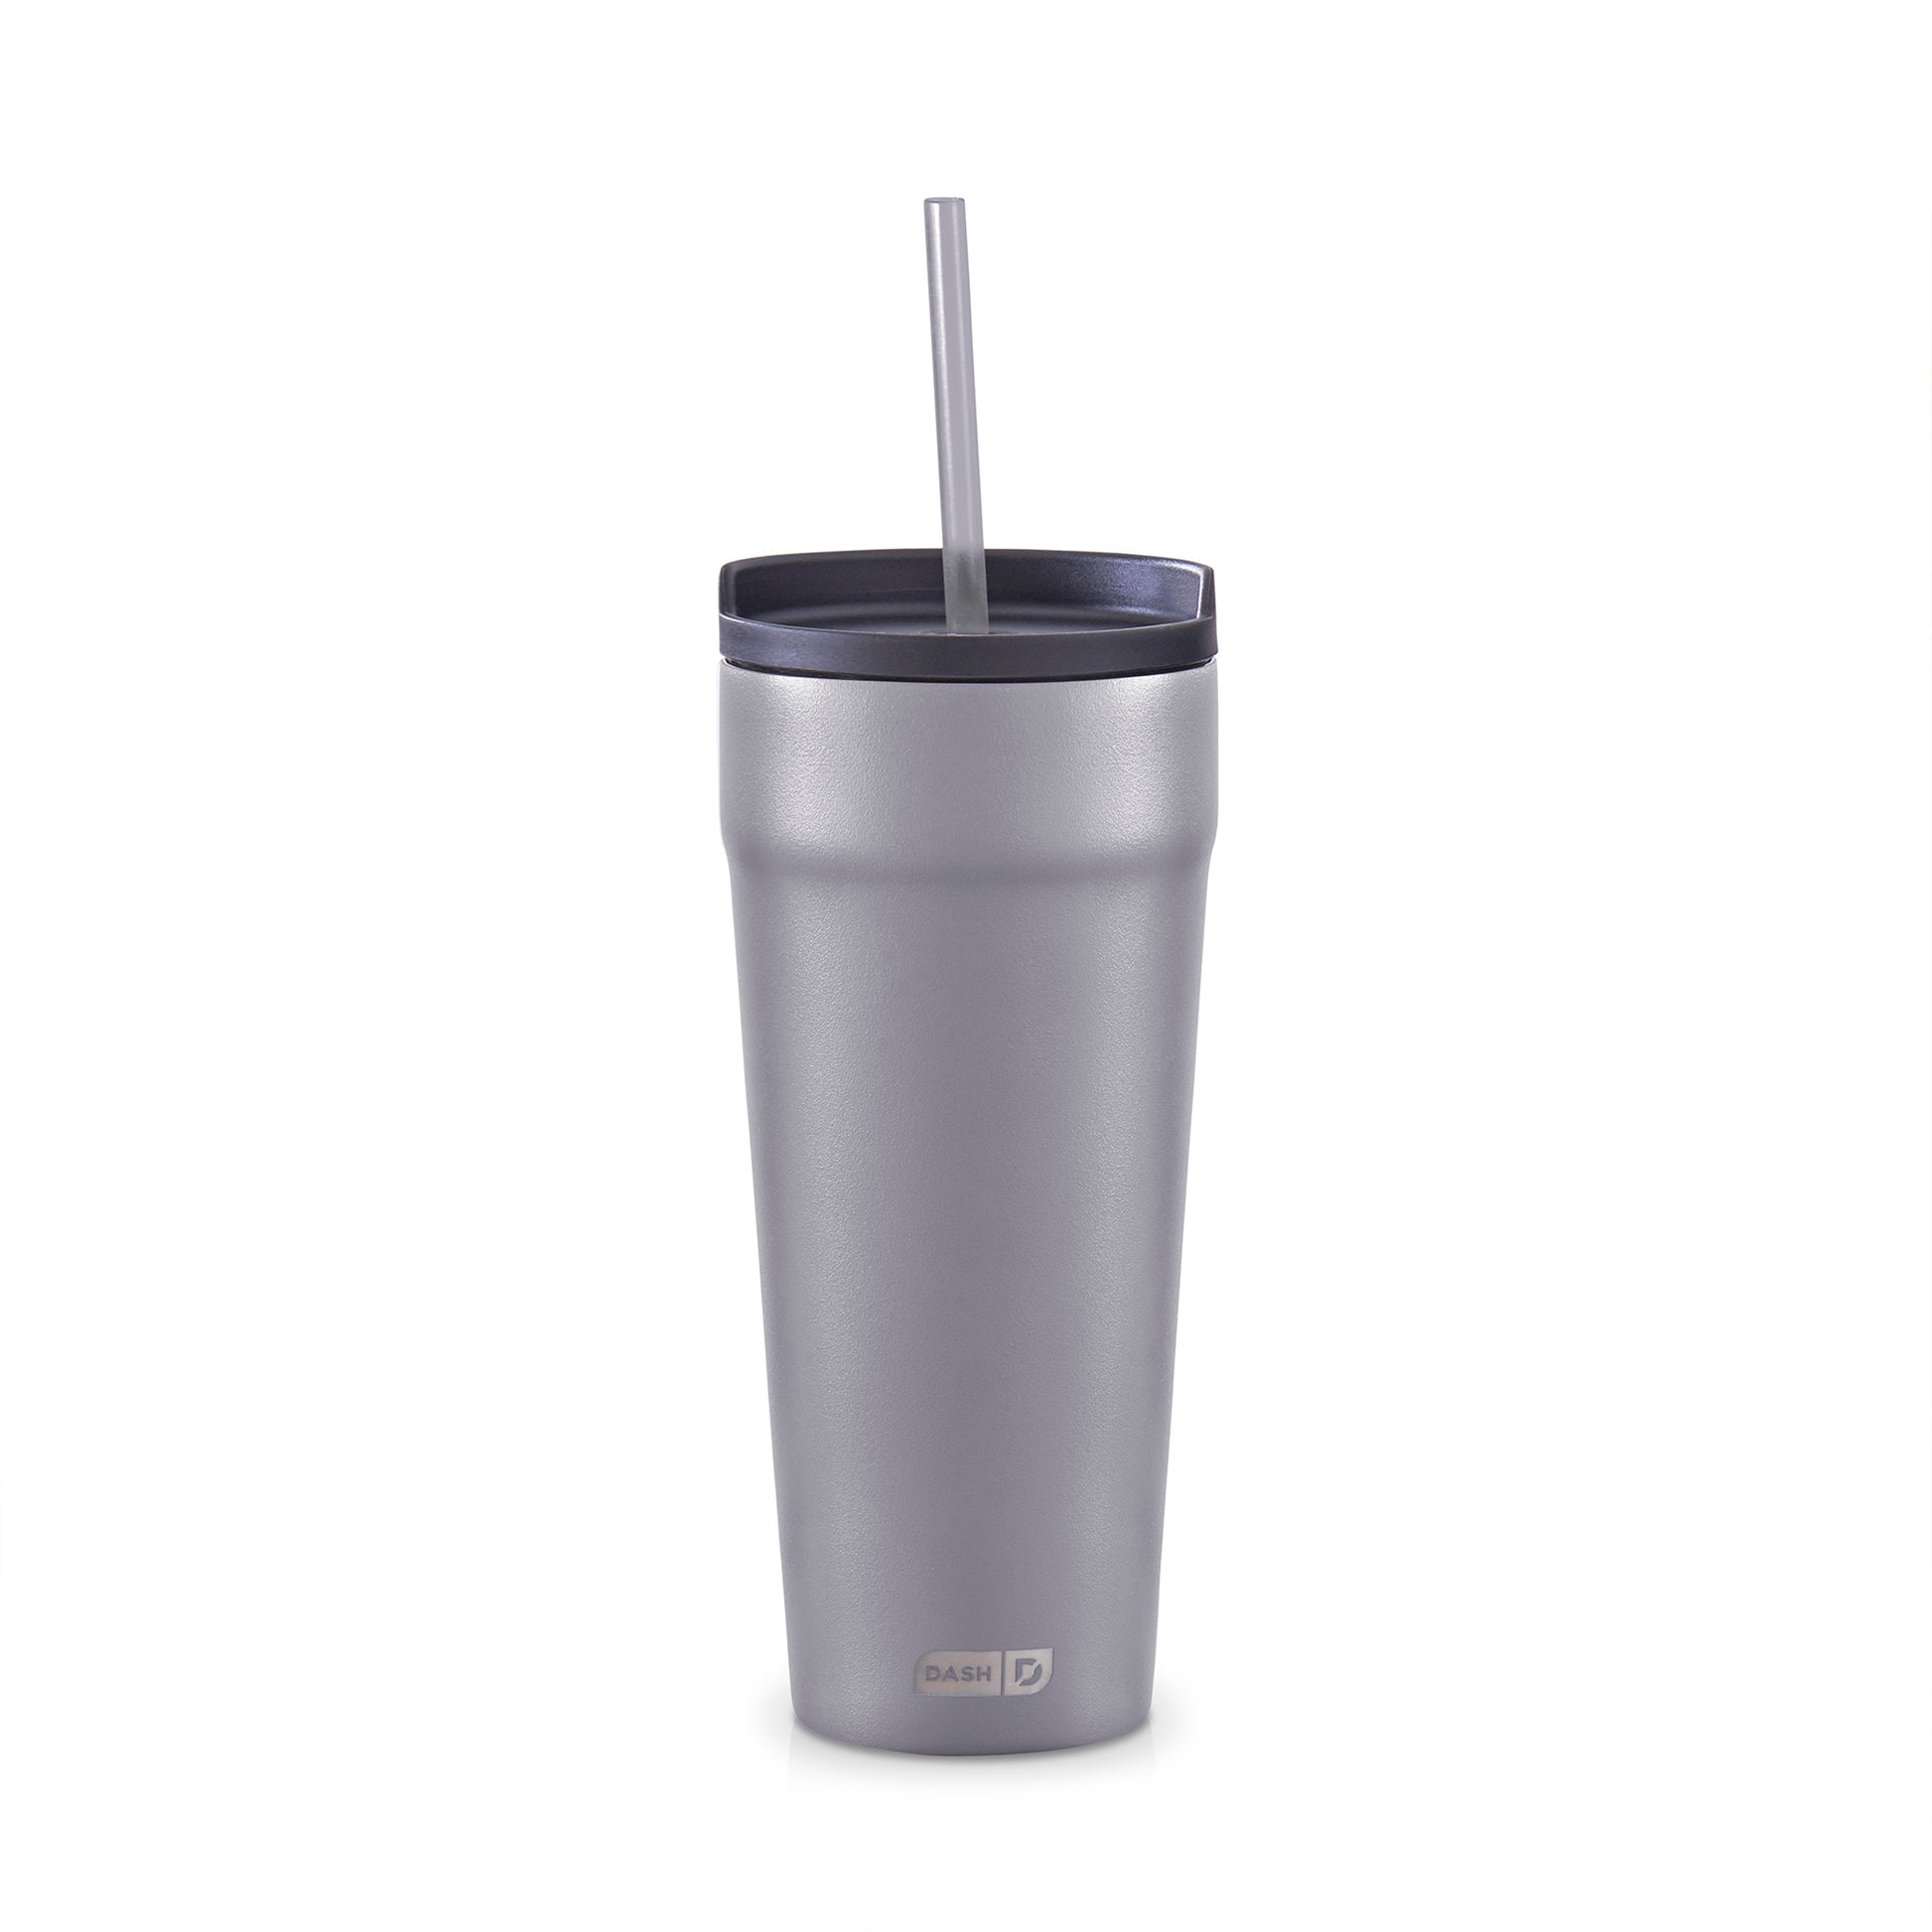 Are Insulated Cups Dishwasher Safe?